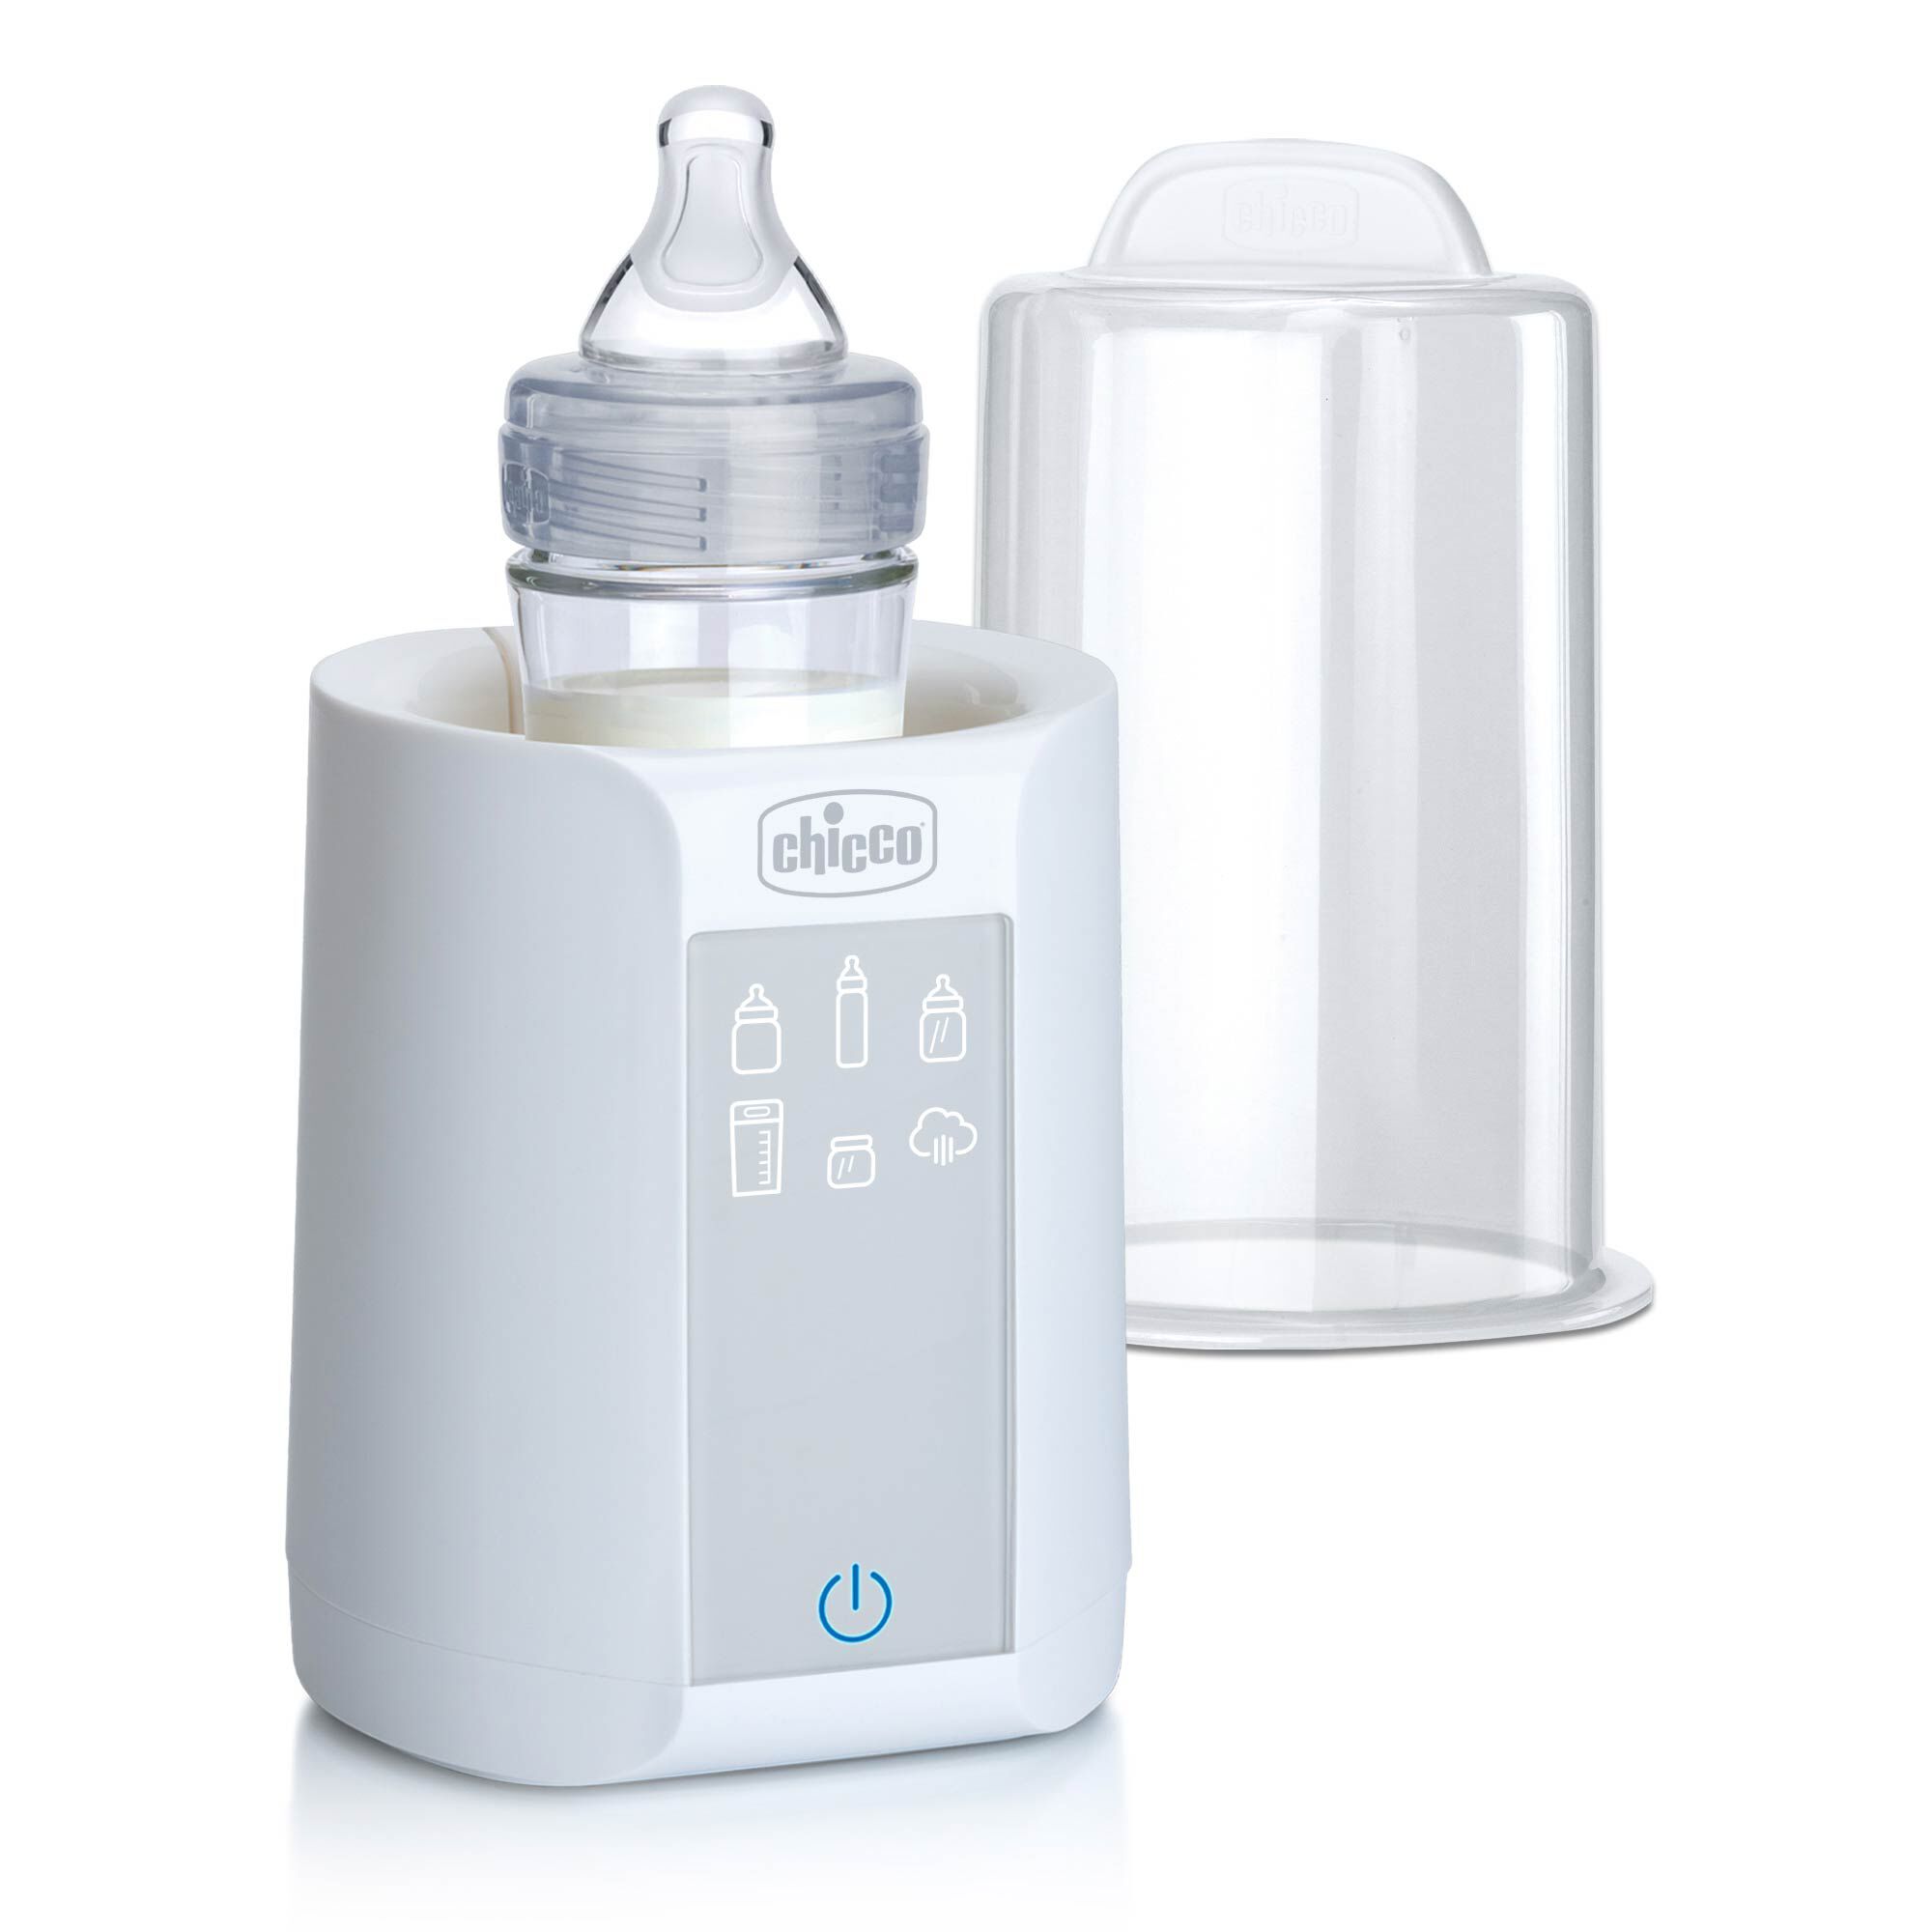 https://www.chiccousa.com/dw/image/v2/AAMT_PRD/on/demandware.static/-/Sites-chicco_catalog/default/dw8a44aff1/images/products/feeding/sterilizers/chicco-digital-bottle-warmer-sterilizer.jpg?sw=2000&sh=2000&sm=fit